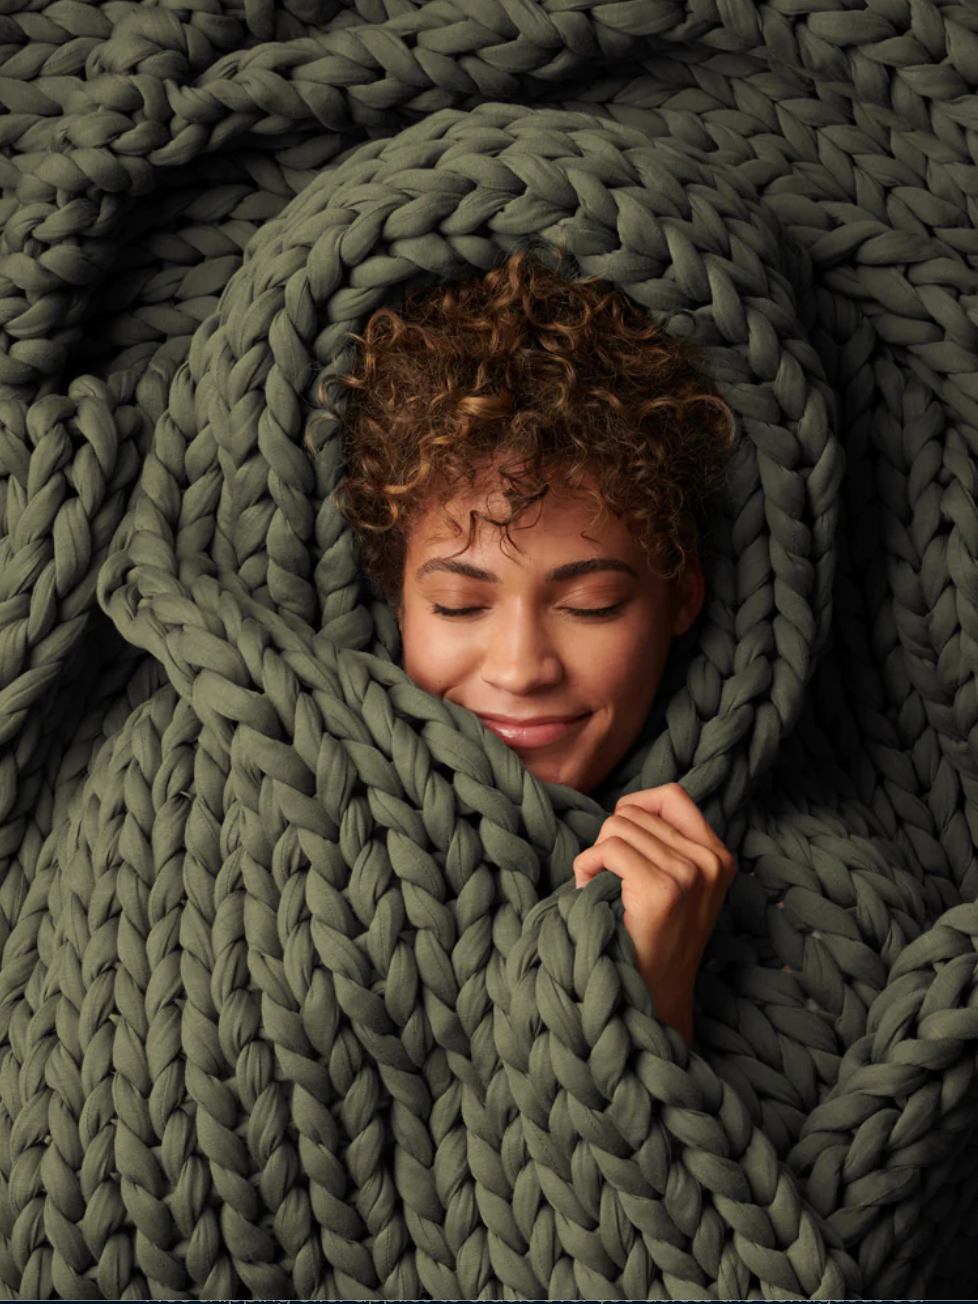 A woman lies down with her eyes closed all wrapped up in a green blanket